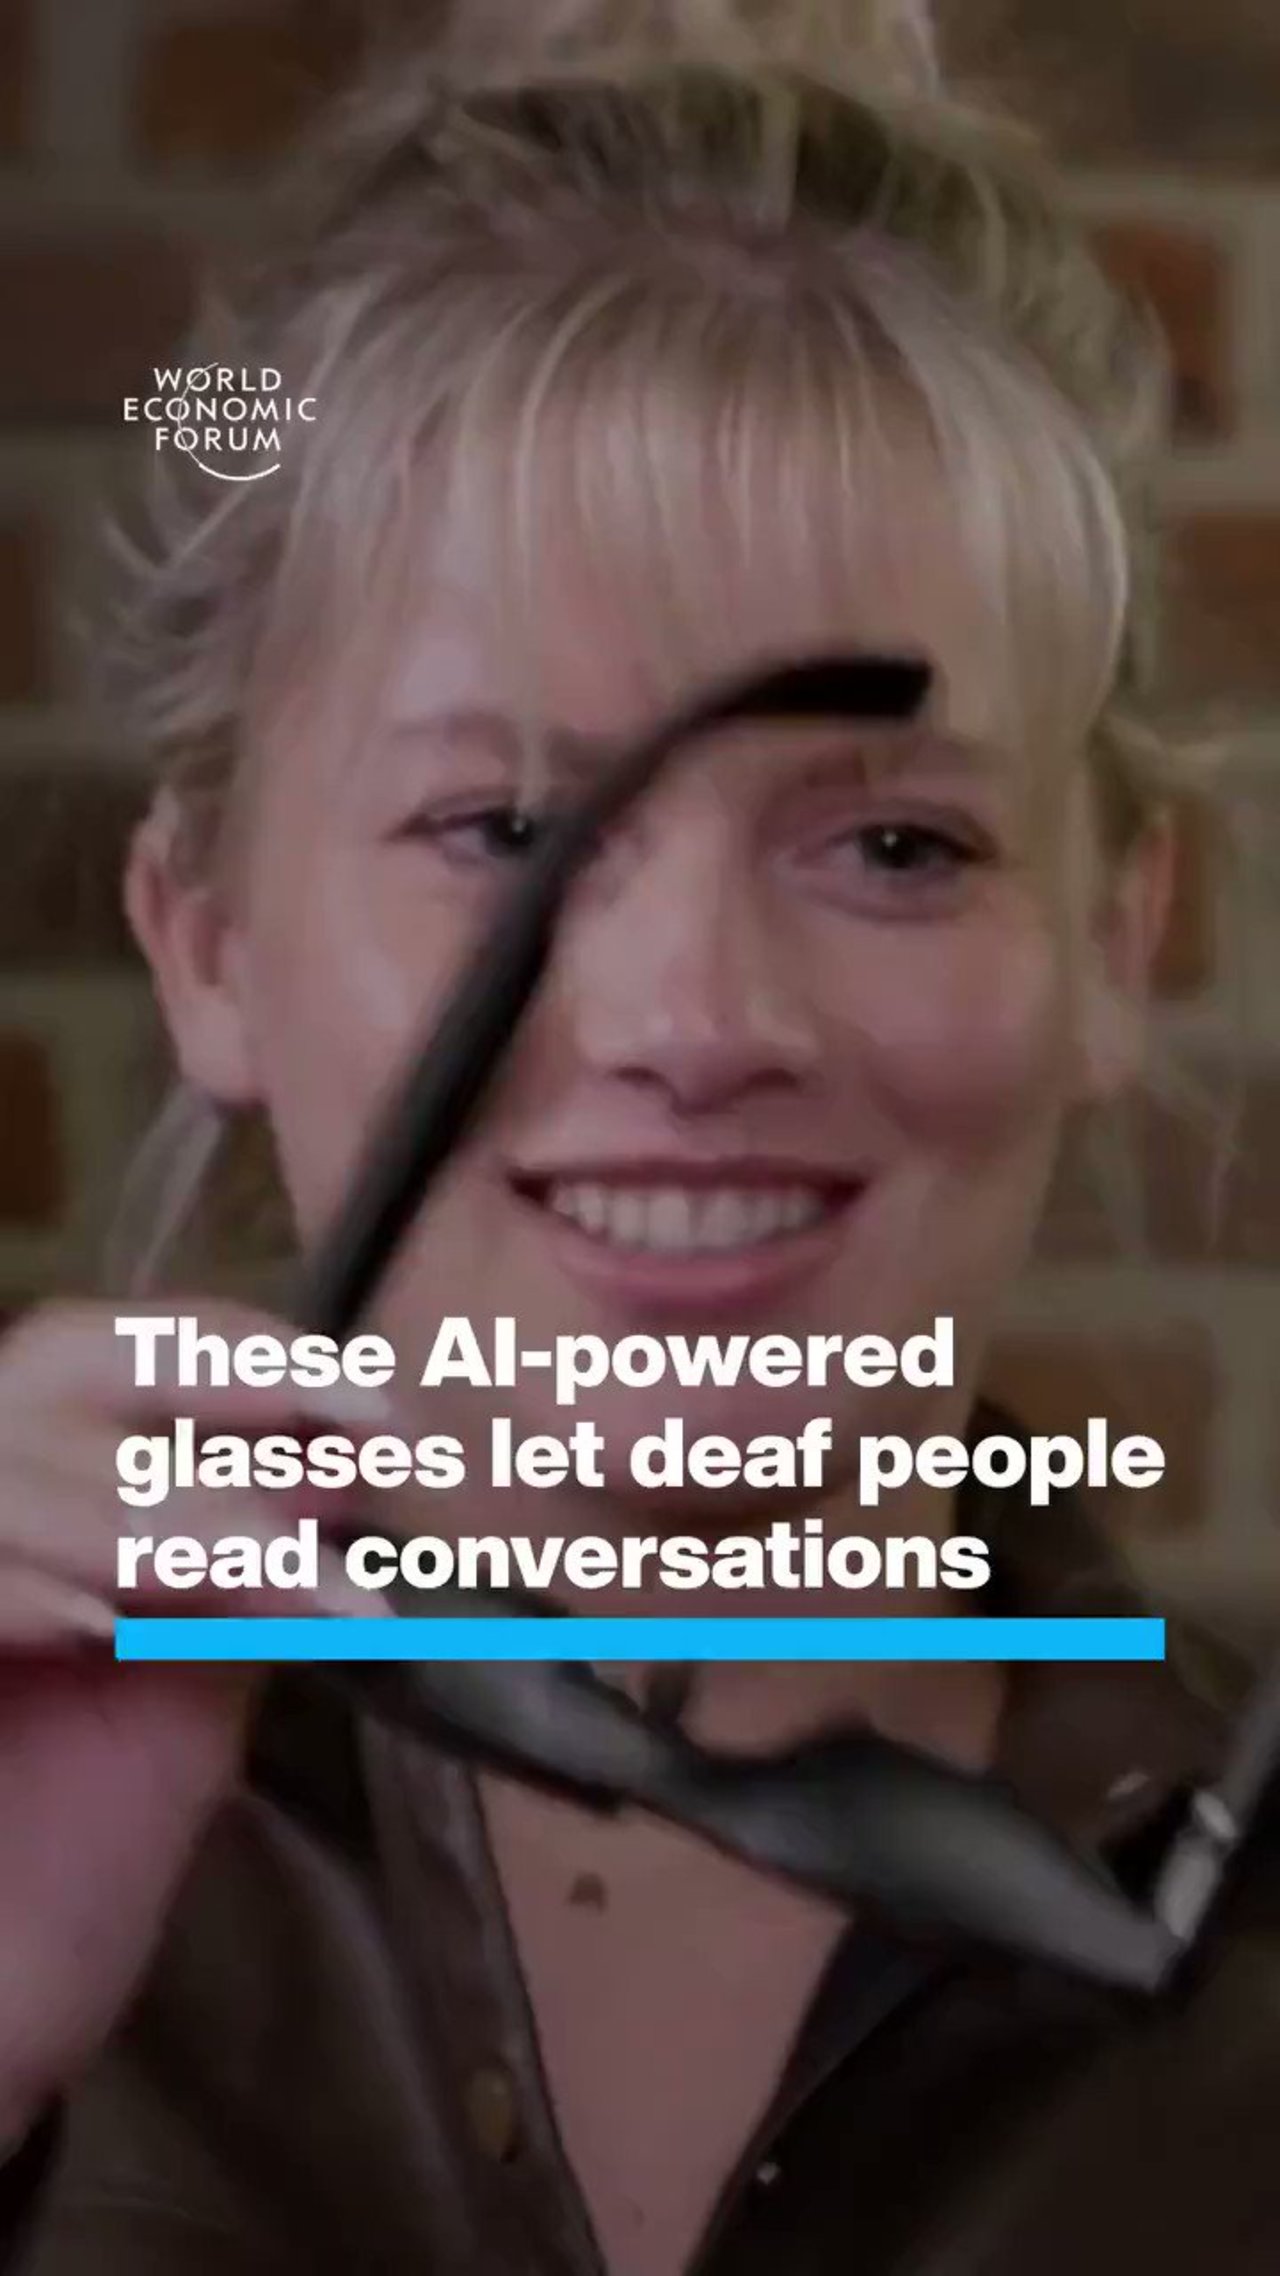 These #AI-powered glasses let deaf people read conversations by @wef #IoT #ArtificialIntelligence #InternetofThings #Innovation #FutureOfWork #Innovation  cc: @maxjcm @ronald_vanloon @pascal_bornet https://t.co/owH8SrWLGz